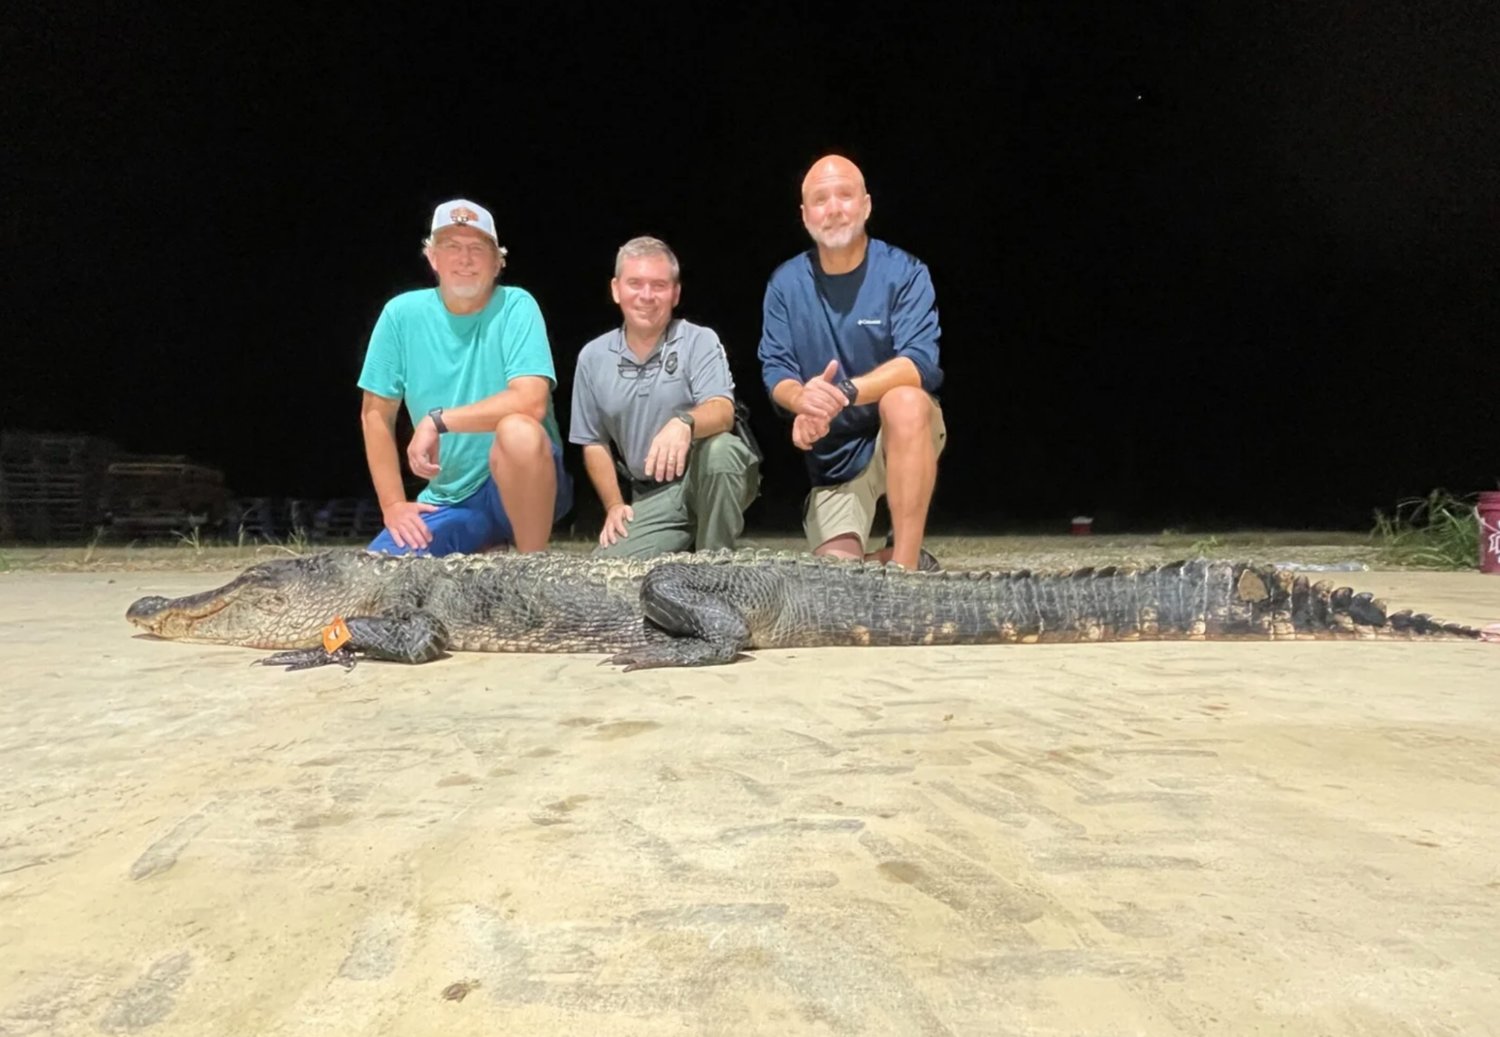 Jim Denson, MDWFP Alligator Program Coordinator Ricky Flynt and Richie Denson kneel beside “Yellow 410,” the largest alligator caught in the state of Mississippi.